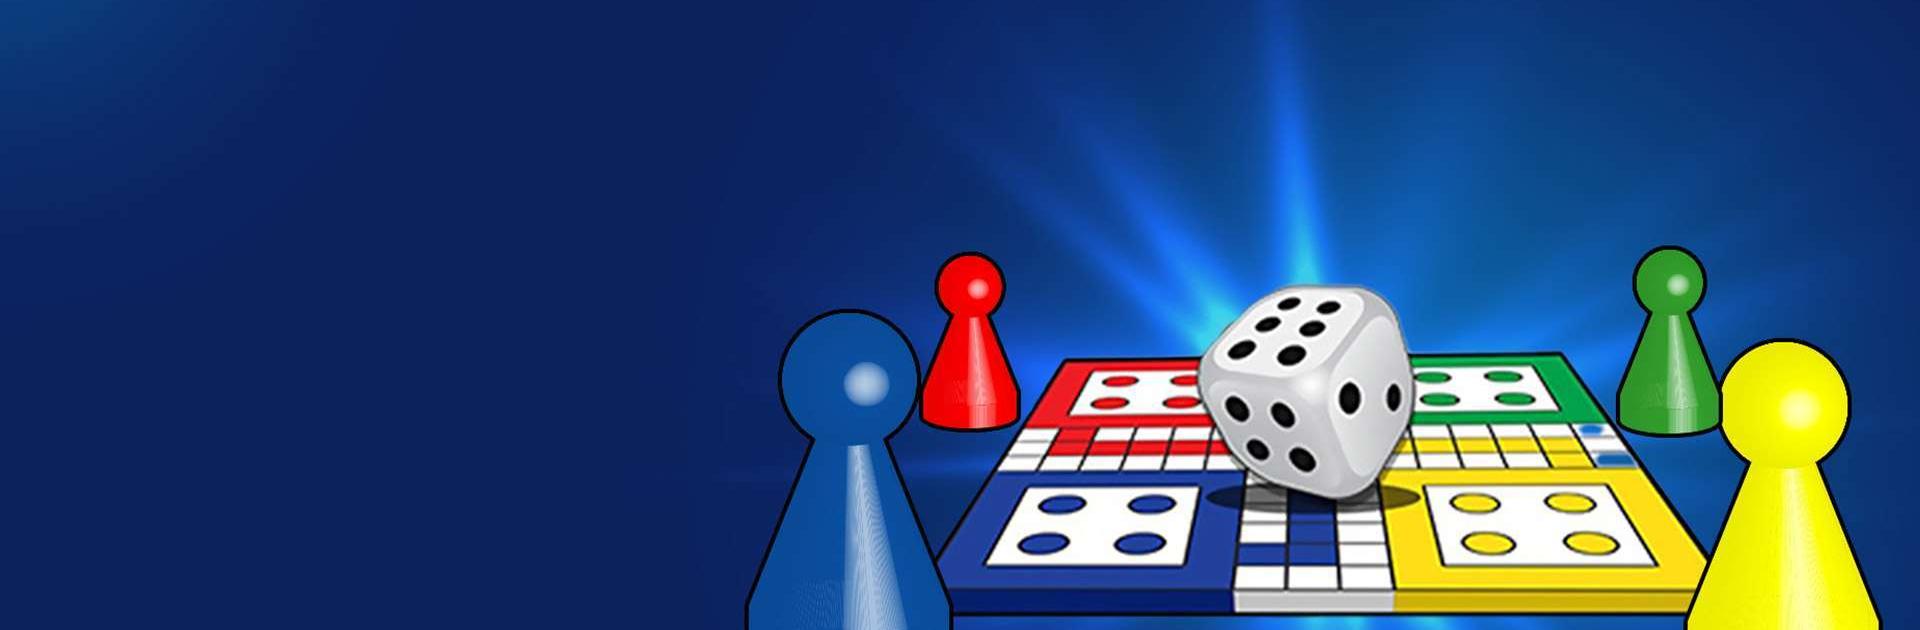 Ludo King - The best Ludo Game online on Google Play Store 